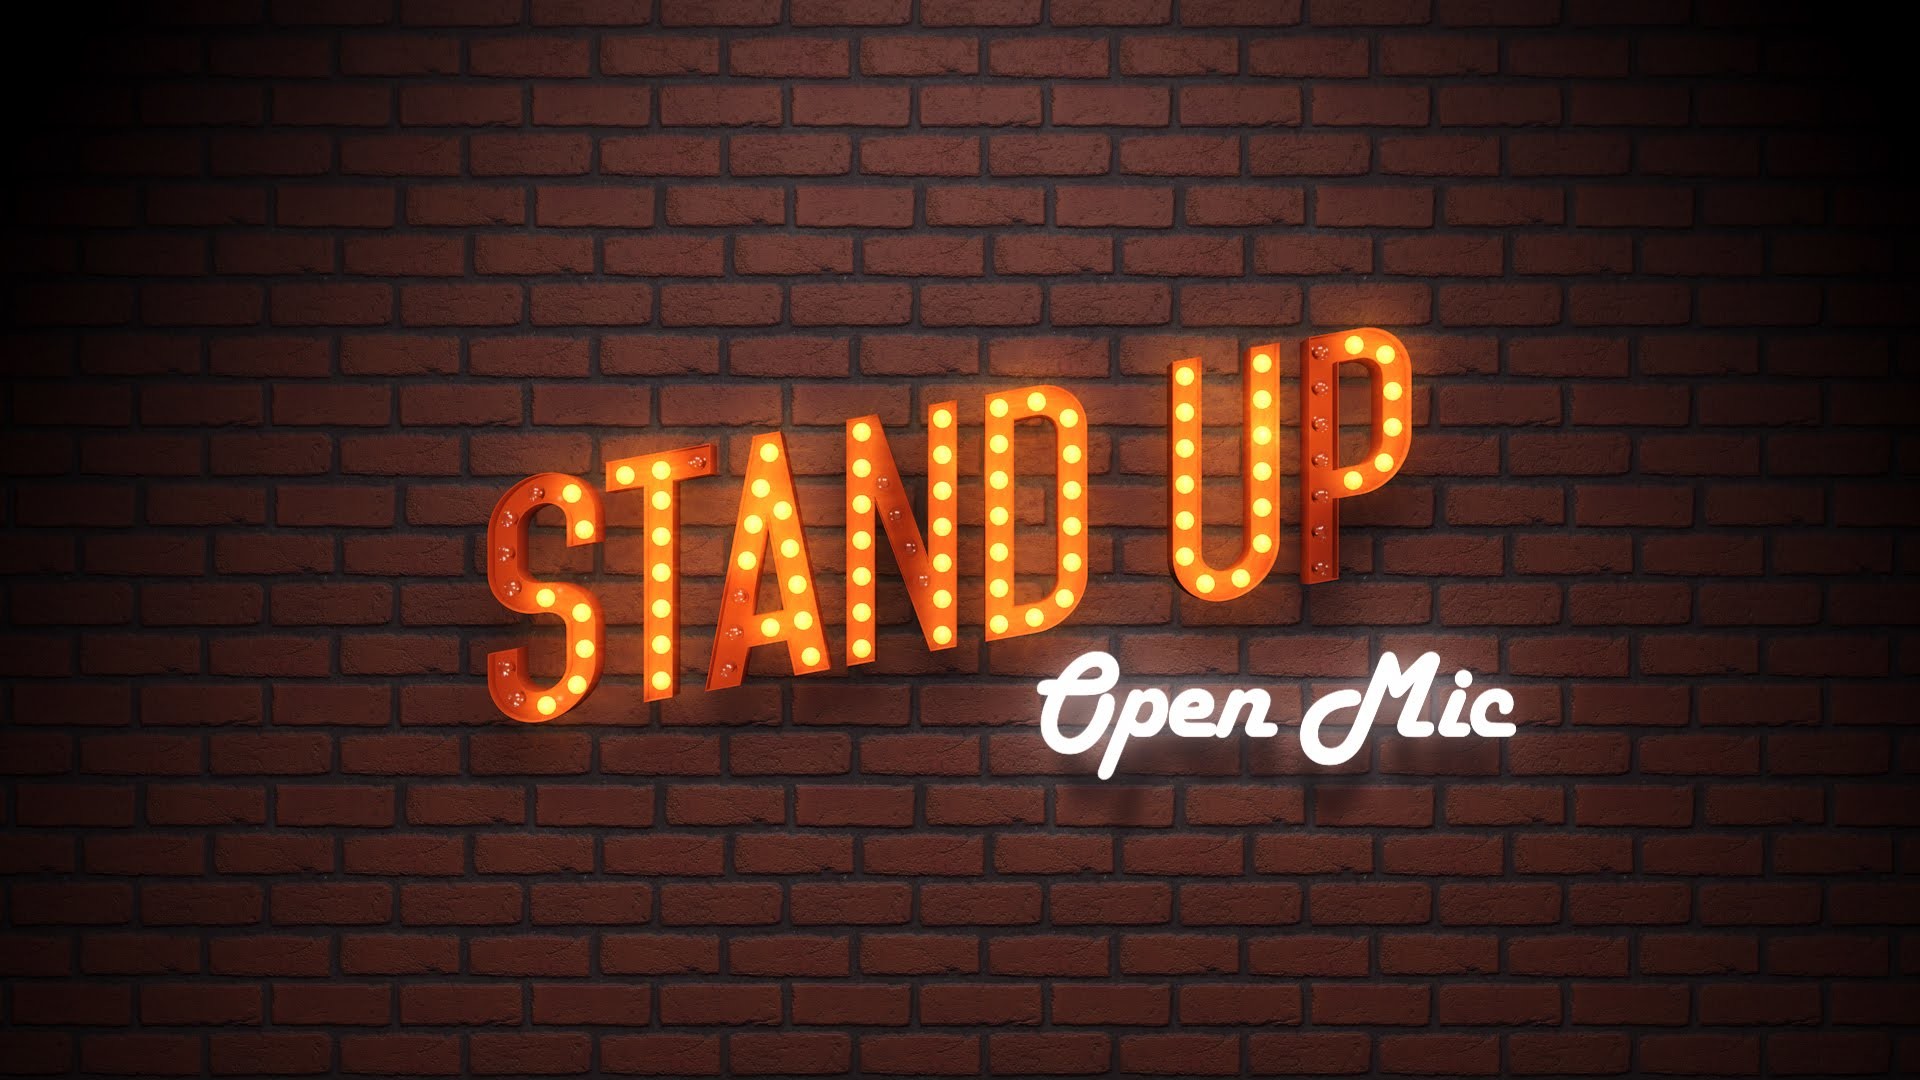 Comedy Wallpapers - Stand Up Comedy Background - 1920x1080 Wallpaper -  